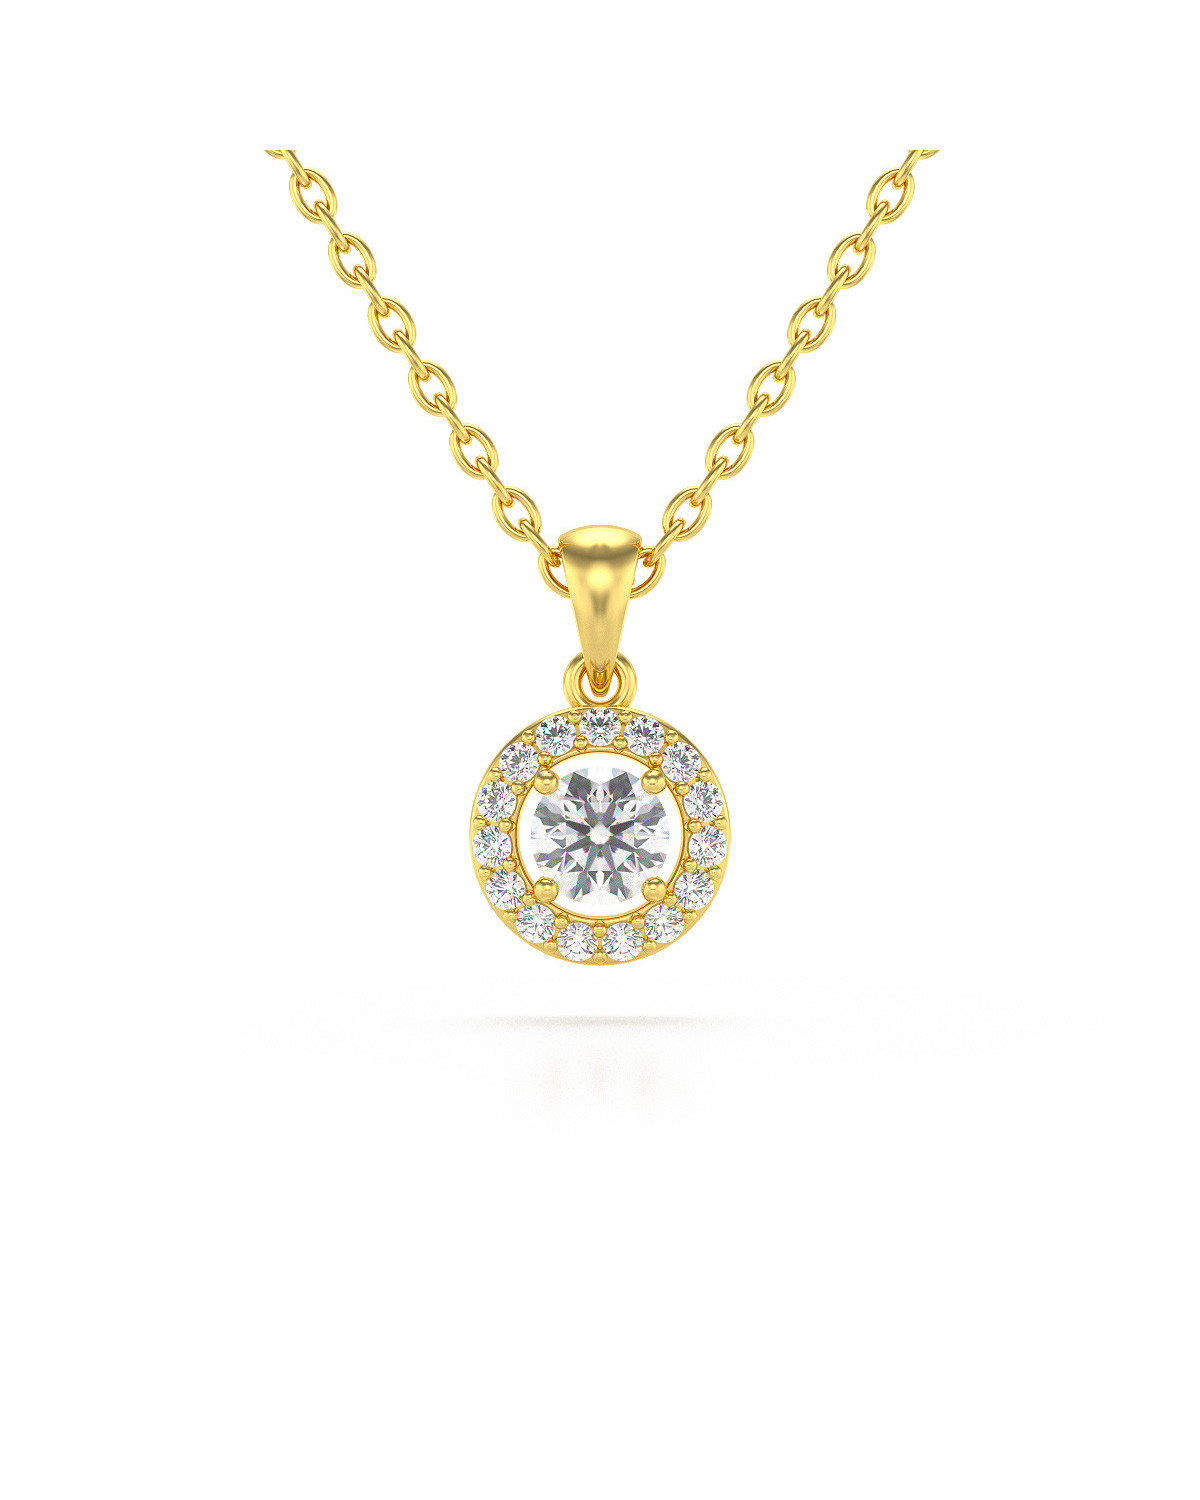 14K Gold Diamonds Necklace Pendant Gold Chain included